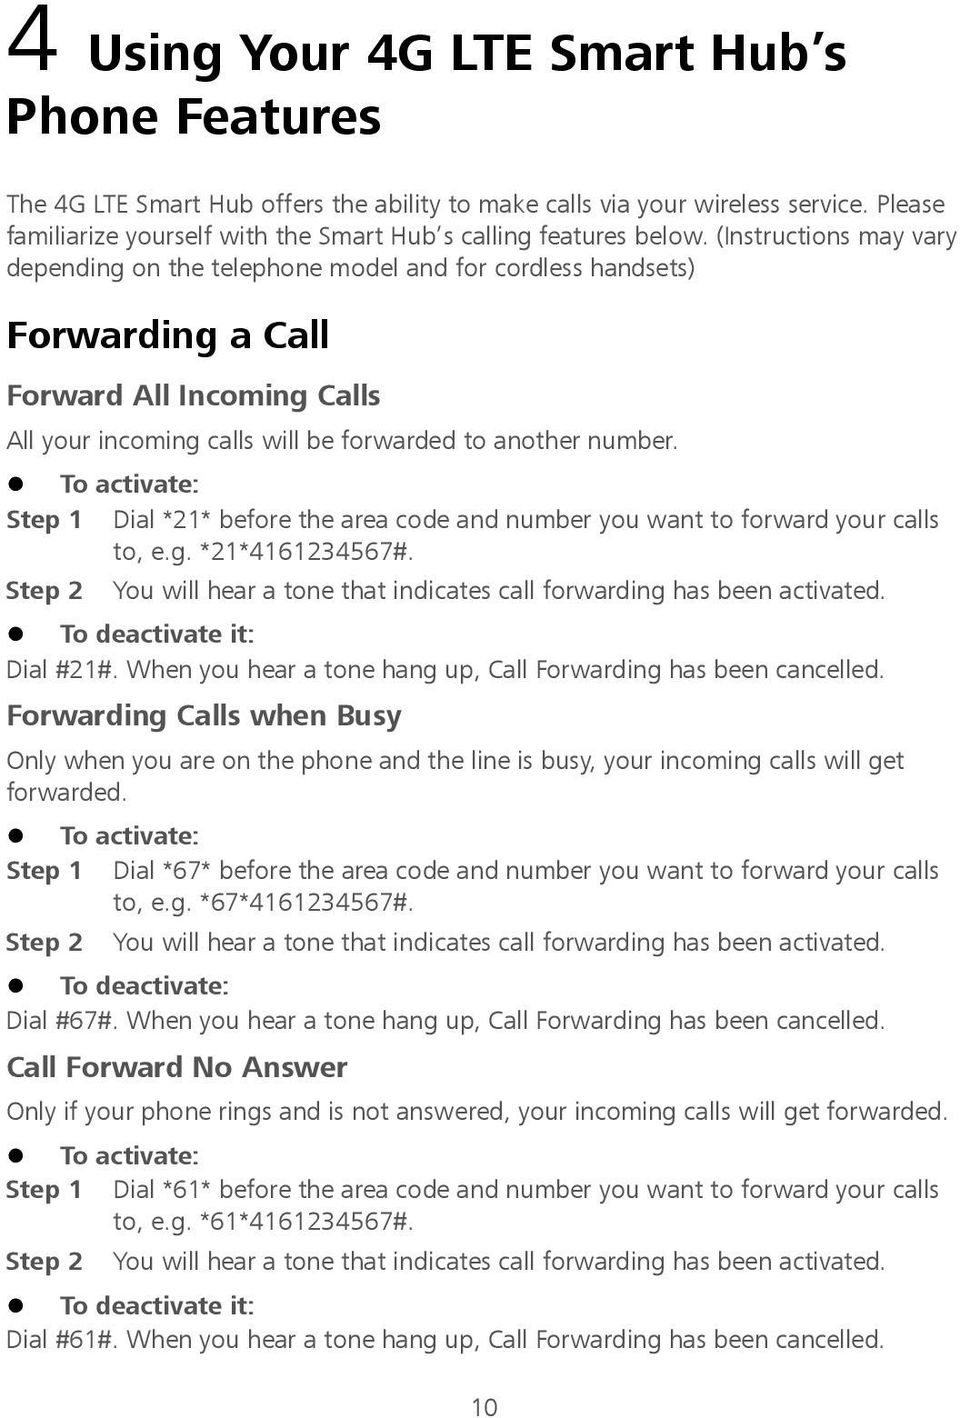 To activate: Step 1 Dial *21* before the area code and number you want to forward your calls to, e.g. *21*4161234567#. Step 2 You will hear a tone that indicates call forwarding has been activated.